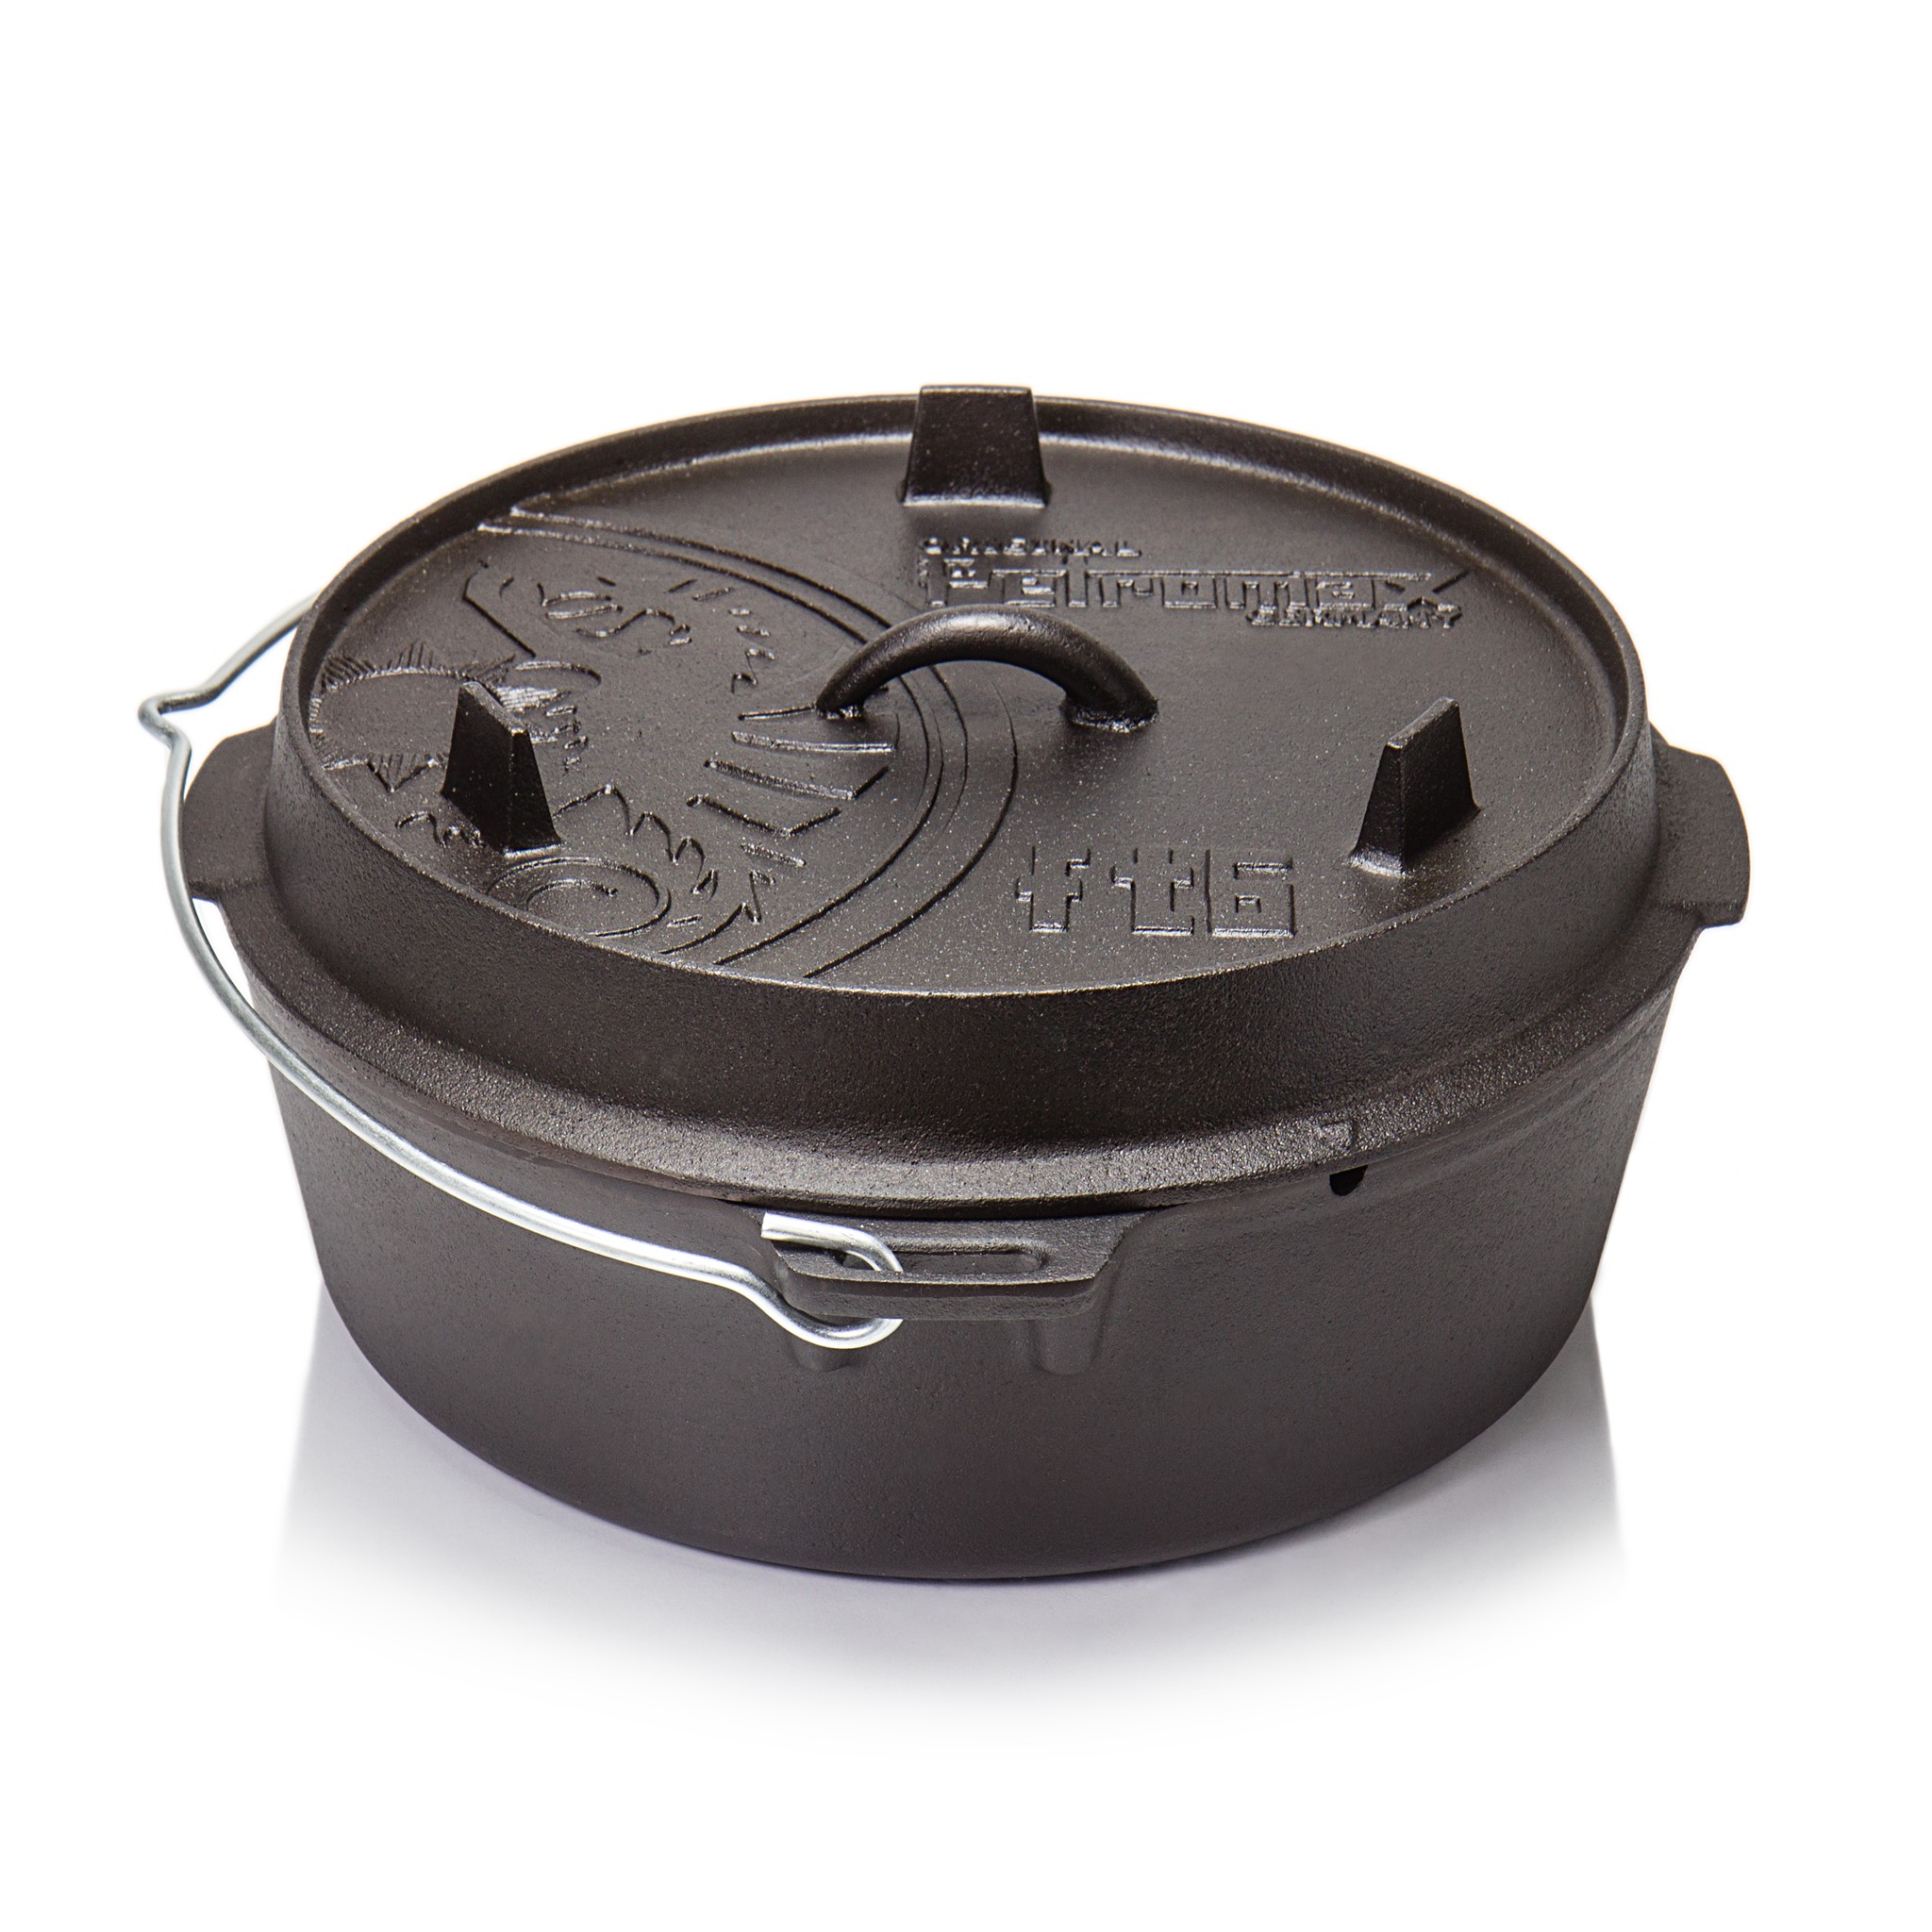 Picture of Petromax - Dutch Oven FT6 5.5 Liter (without legs)